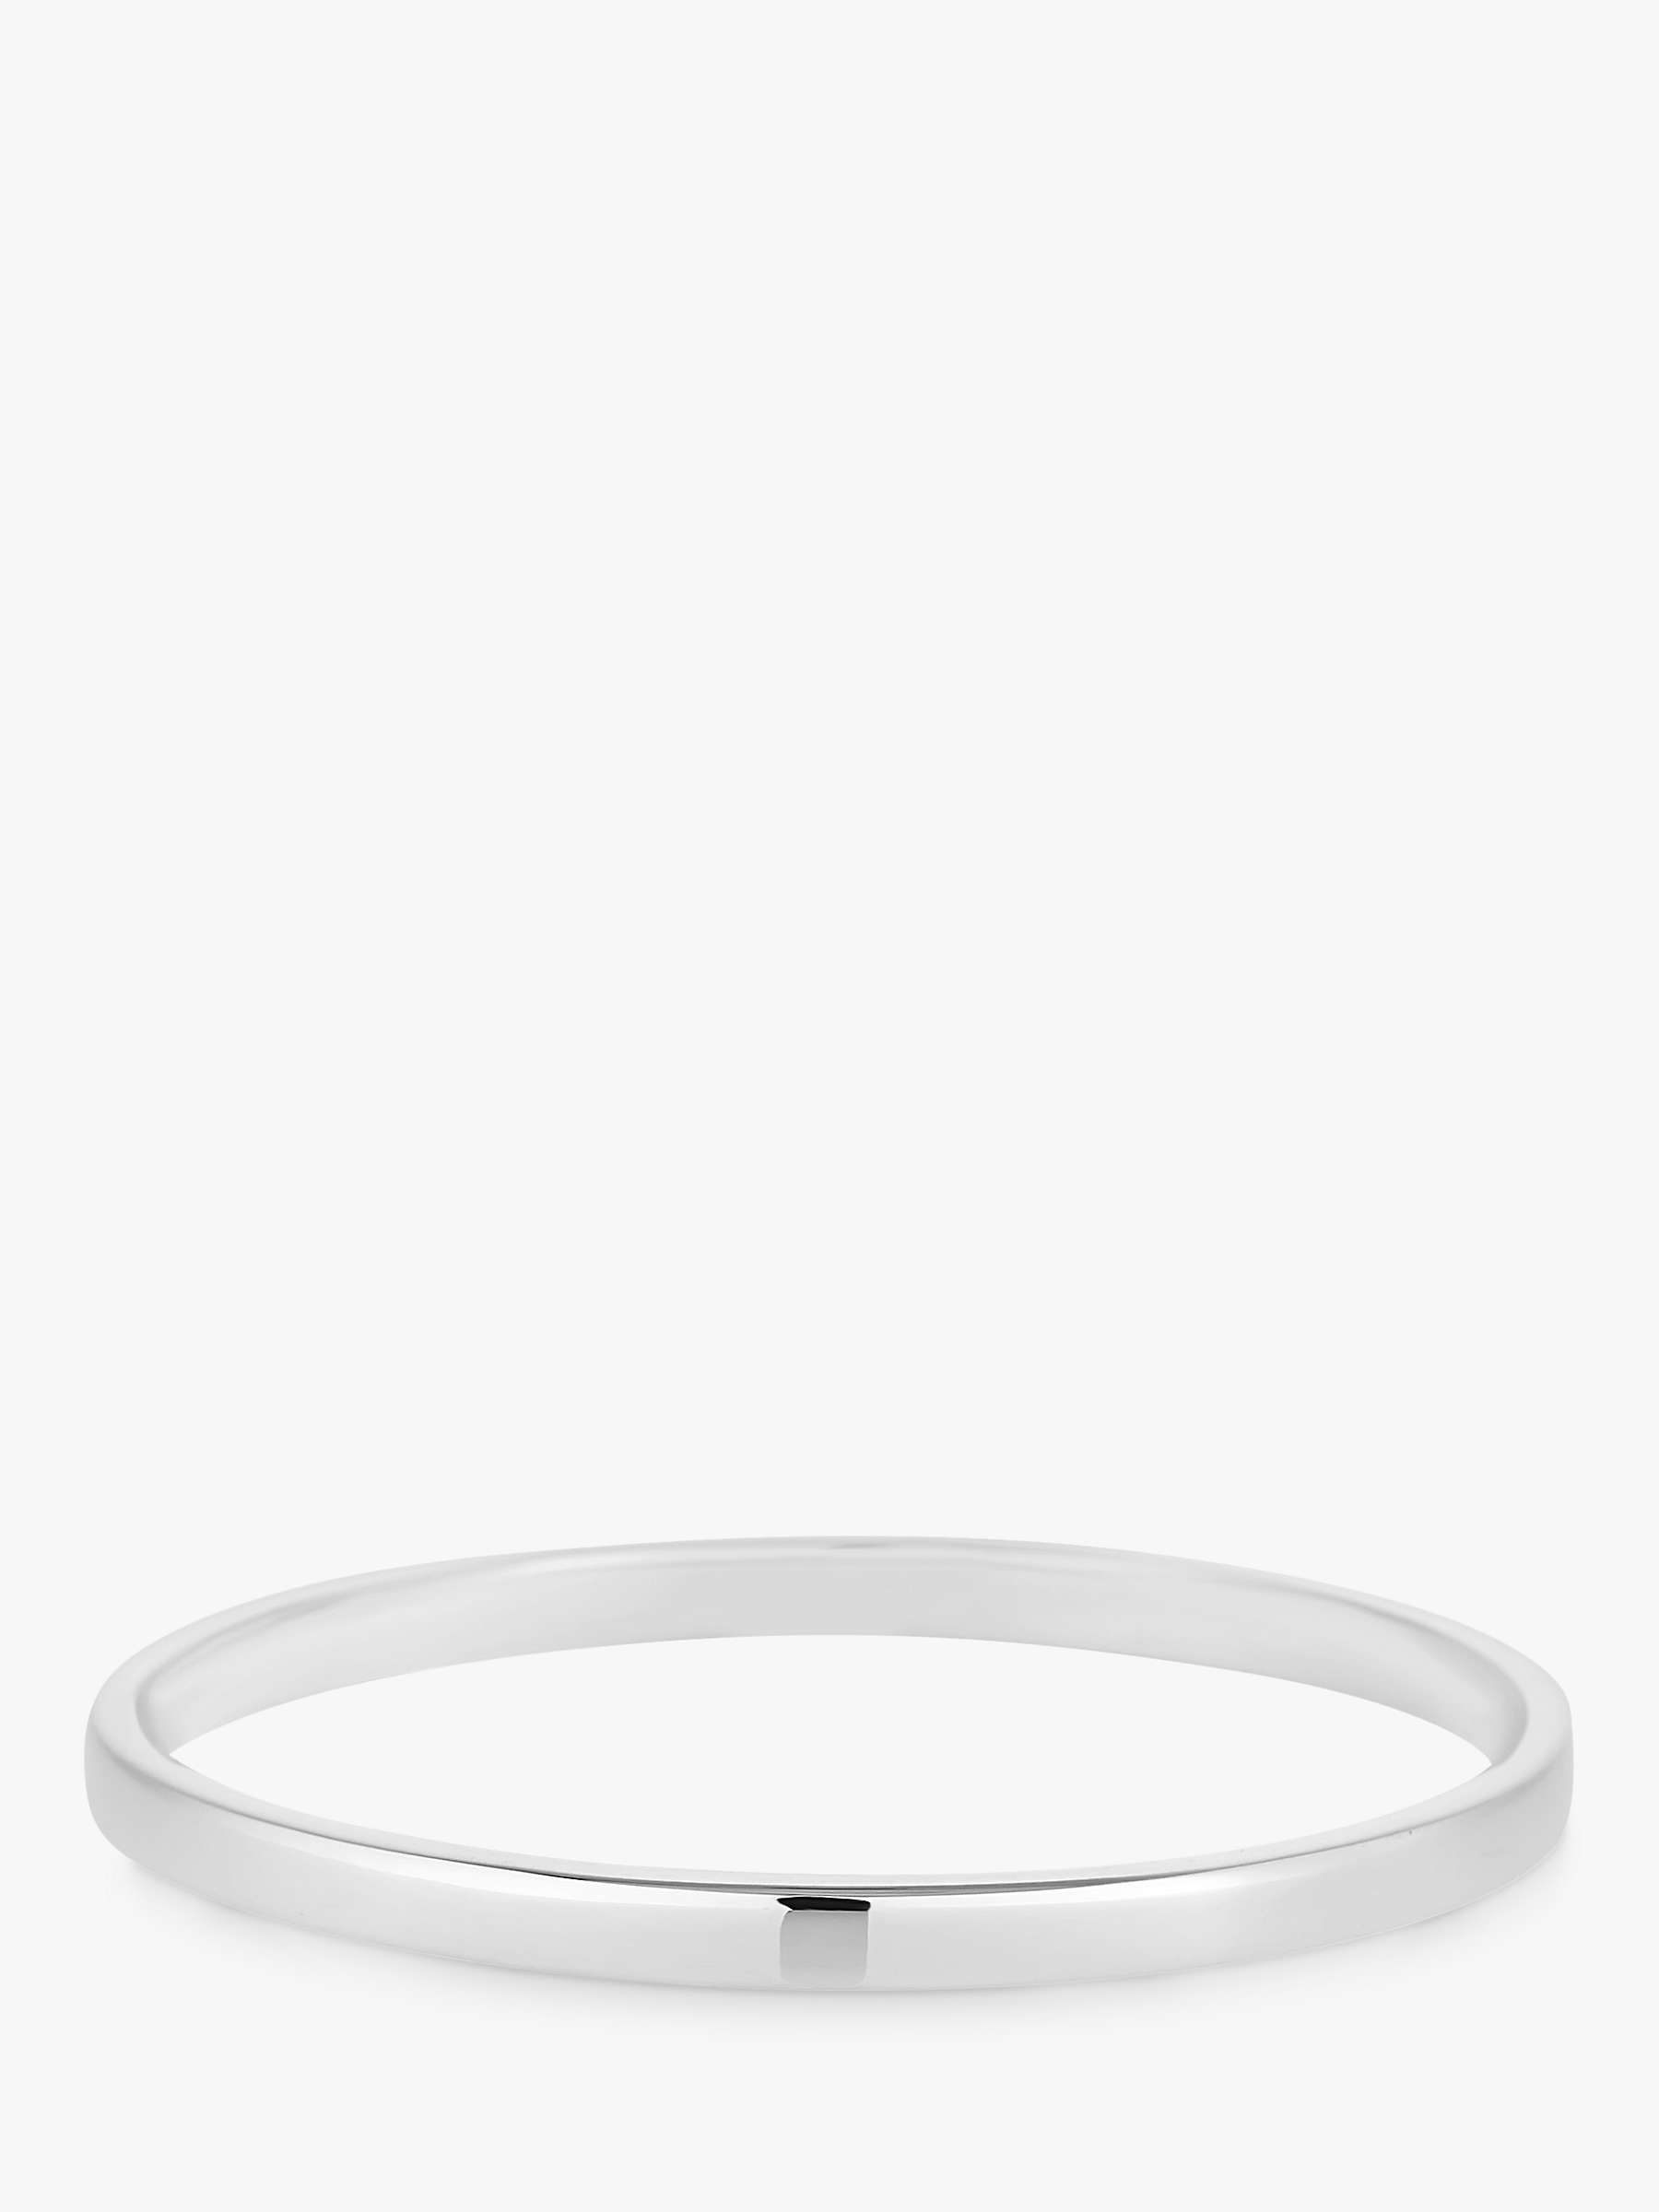 Buy Simply Silver Bangle, Silver Online at johnlewis.com